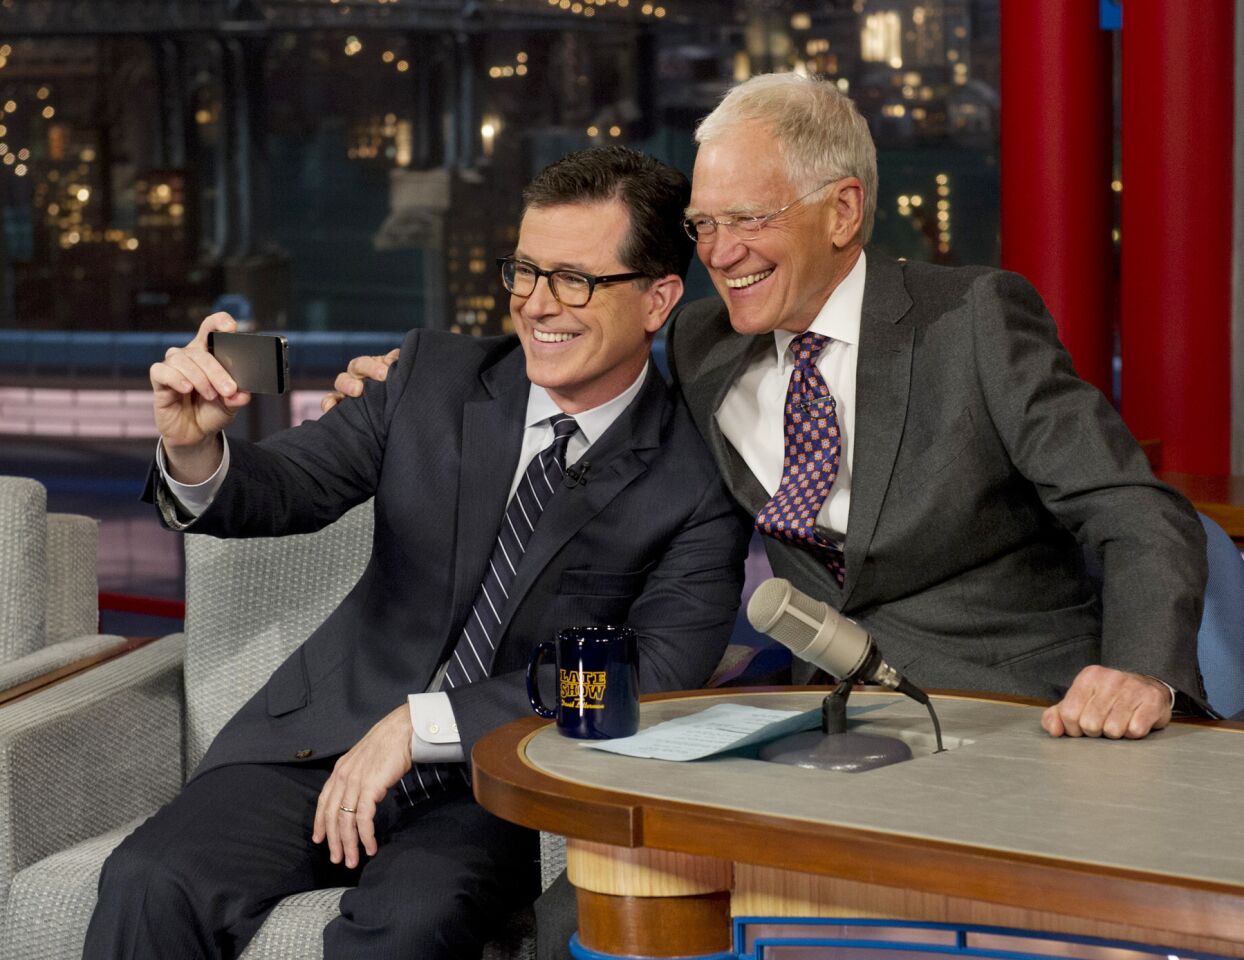 Stephen Colbert, left, takes a selfie with David Letterman on the set of "Late Show with David Letterman" on April 22, 2014, in New York. This was Colbert's first visit to the show since CBS announced that he will succeed Letterman as host when he retires in 2015.